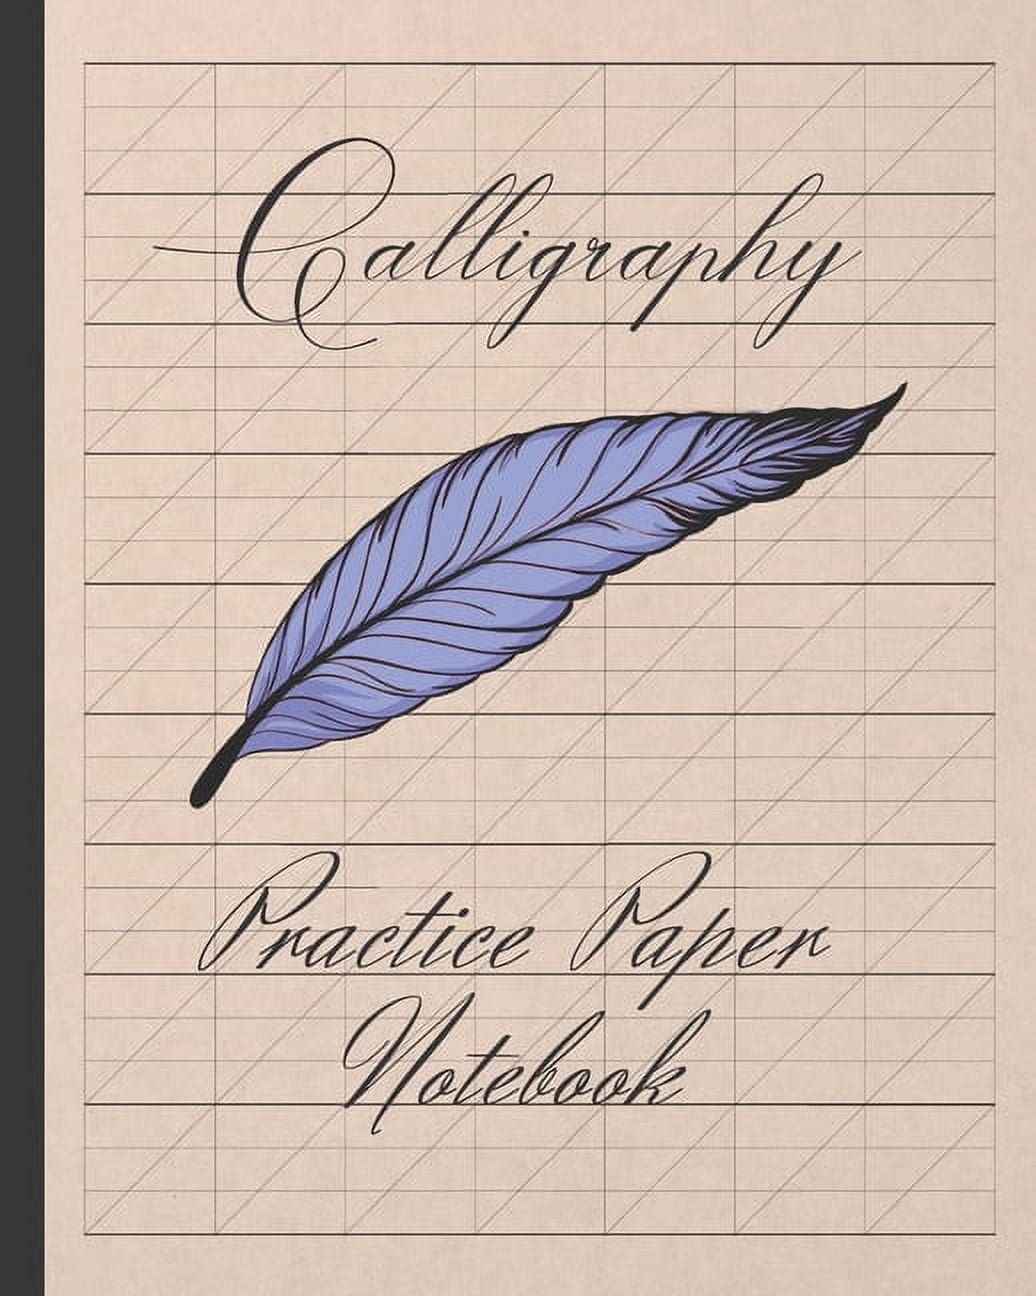 Calligraphy Paper: PLEASANT HILL Notebook (Paperback)